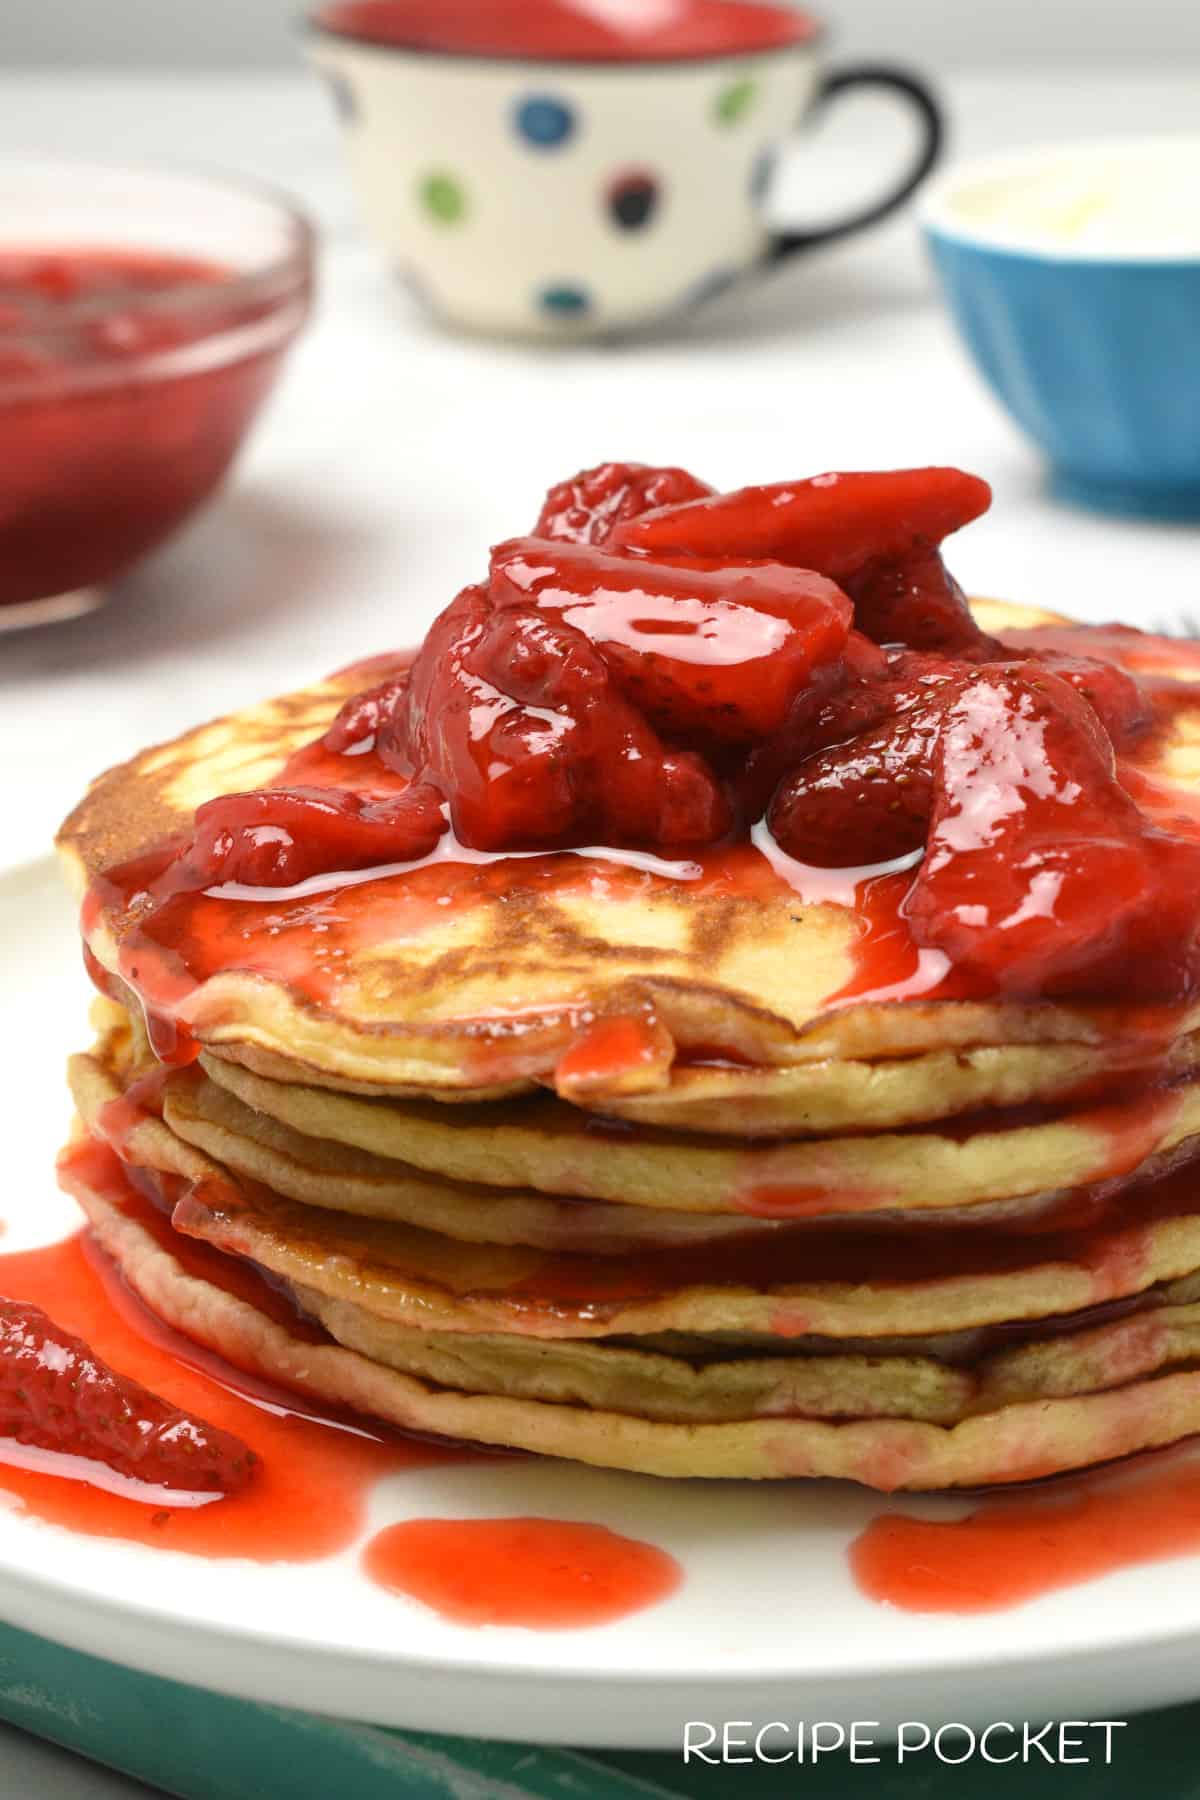 Ricotta pancakes with strawberry compote on top.